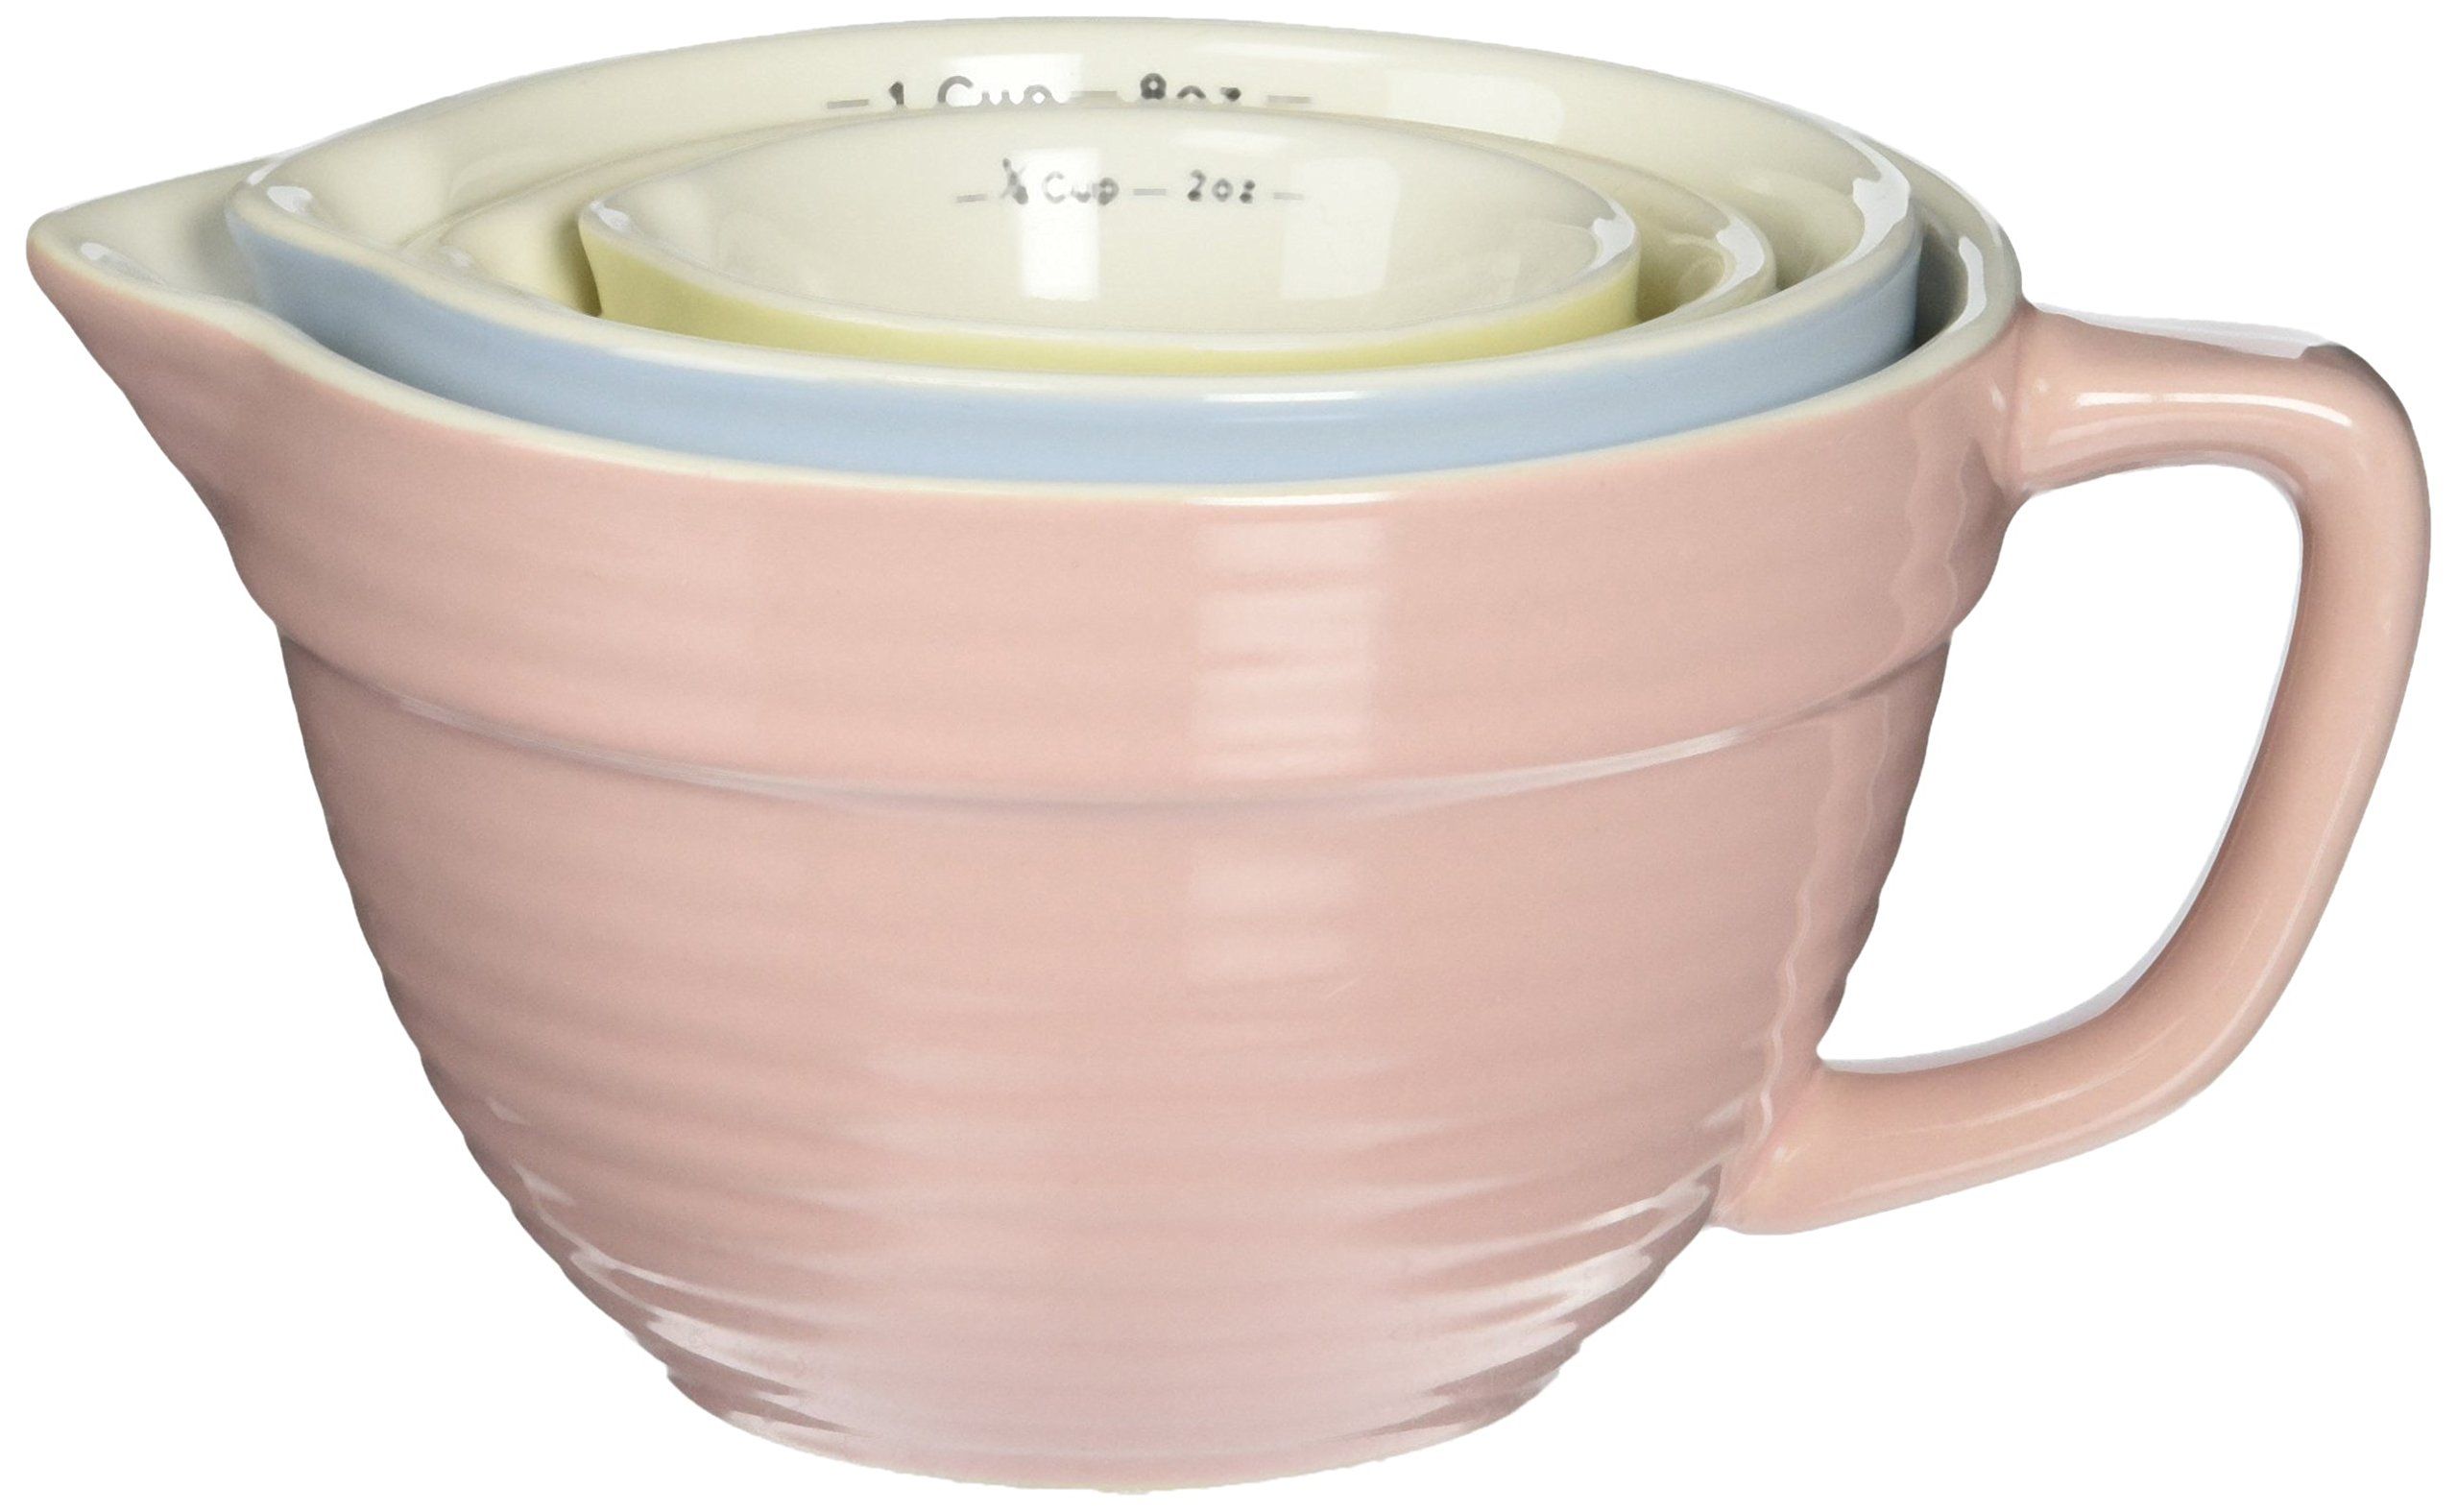 Creative Co-Op Set of 4 Batter Bowl Shaped Measuring Cups in Pink, Blue, Green & Yellow | Amazon (US)